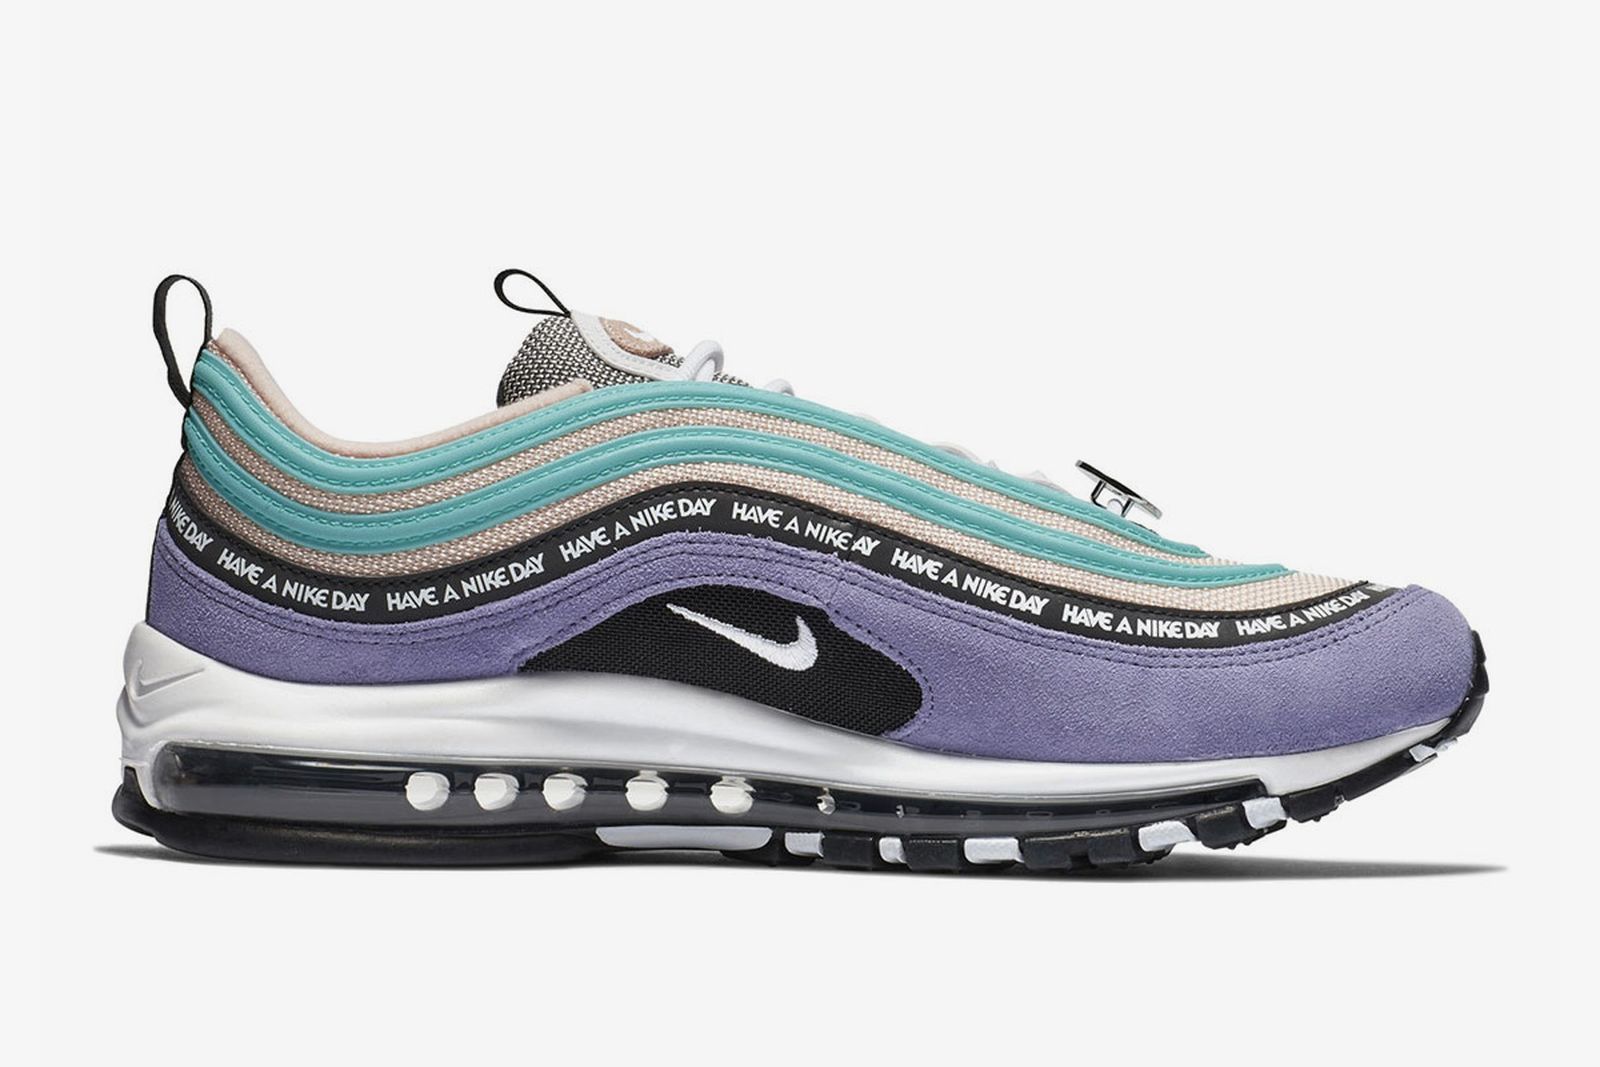 Tuesday Formulate weekend Nike Air Max 97 "Have A Nice Day" Product Shots Surface Online